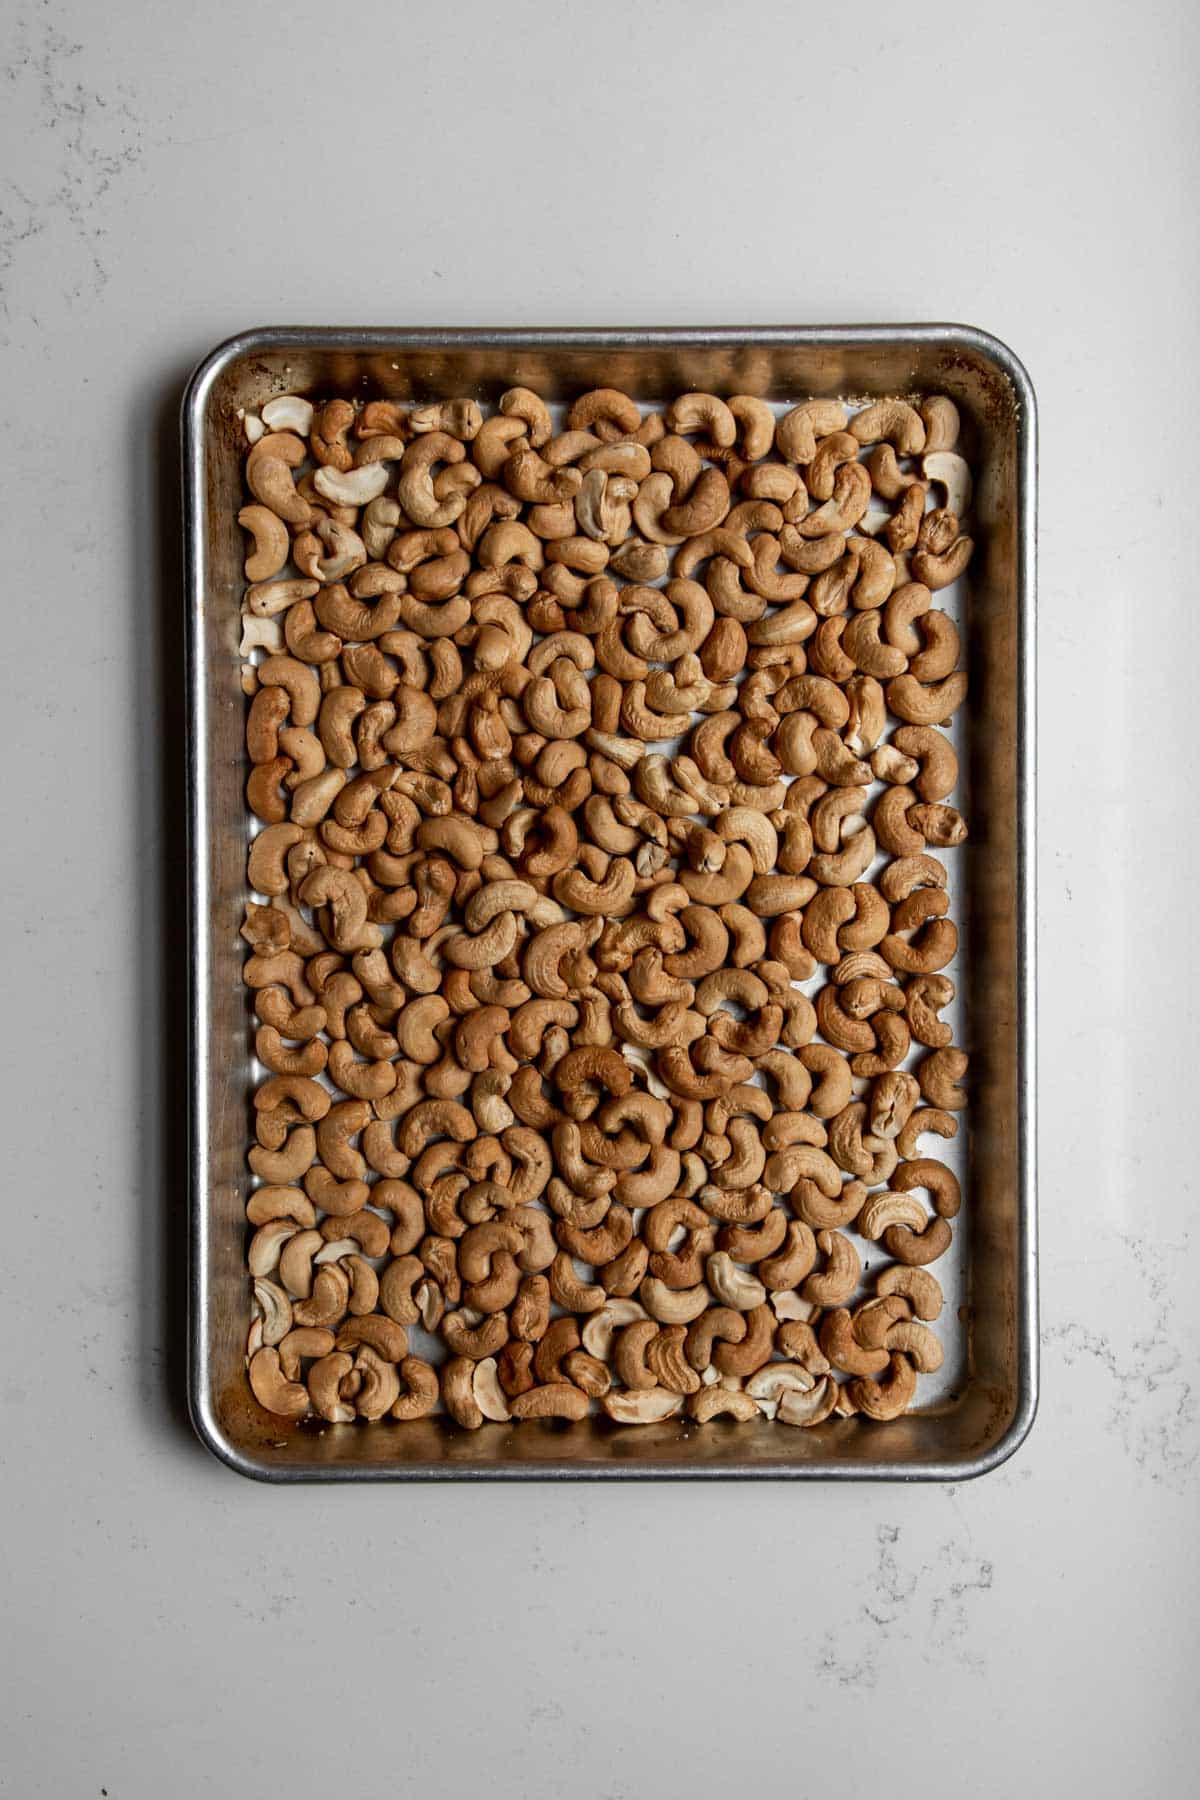 Overhead view of roasted cashews on a silver baking sheet.